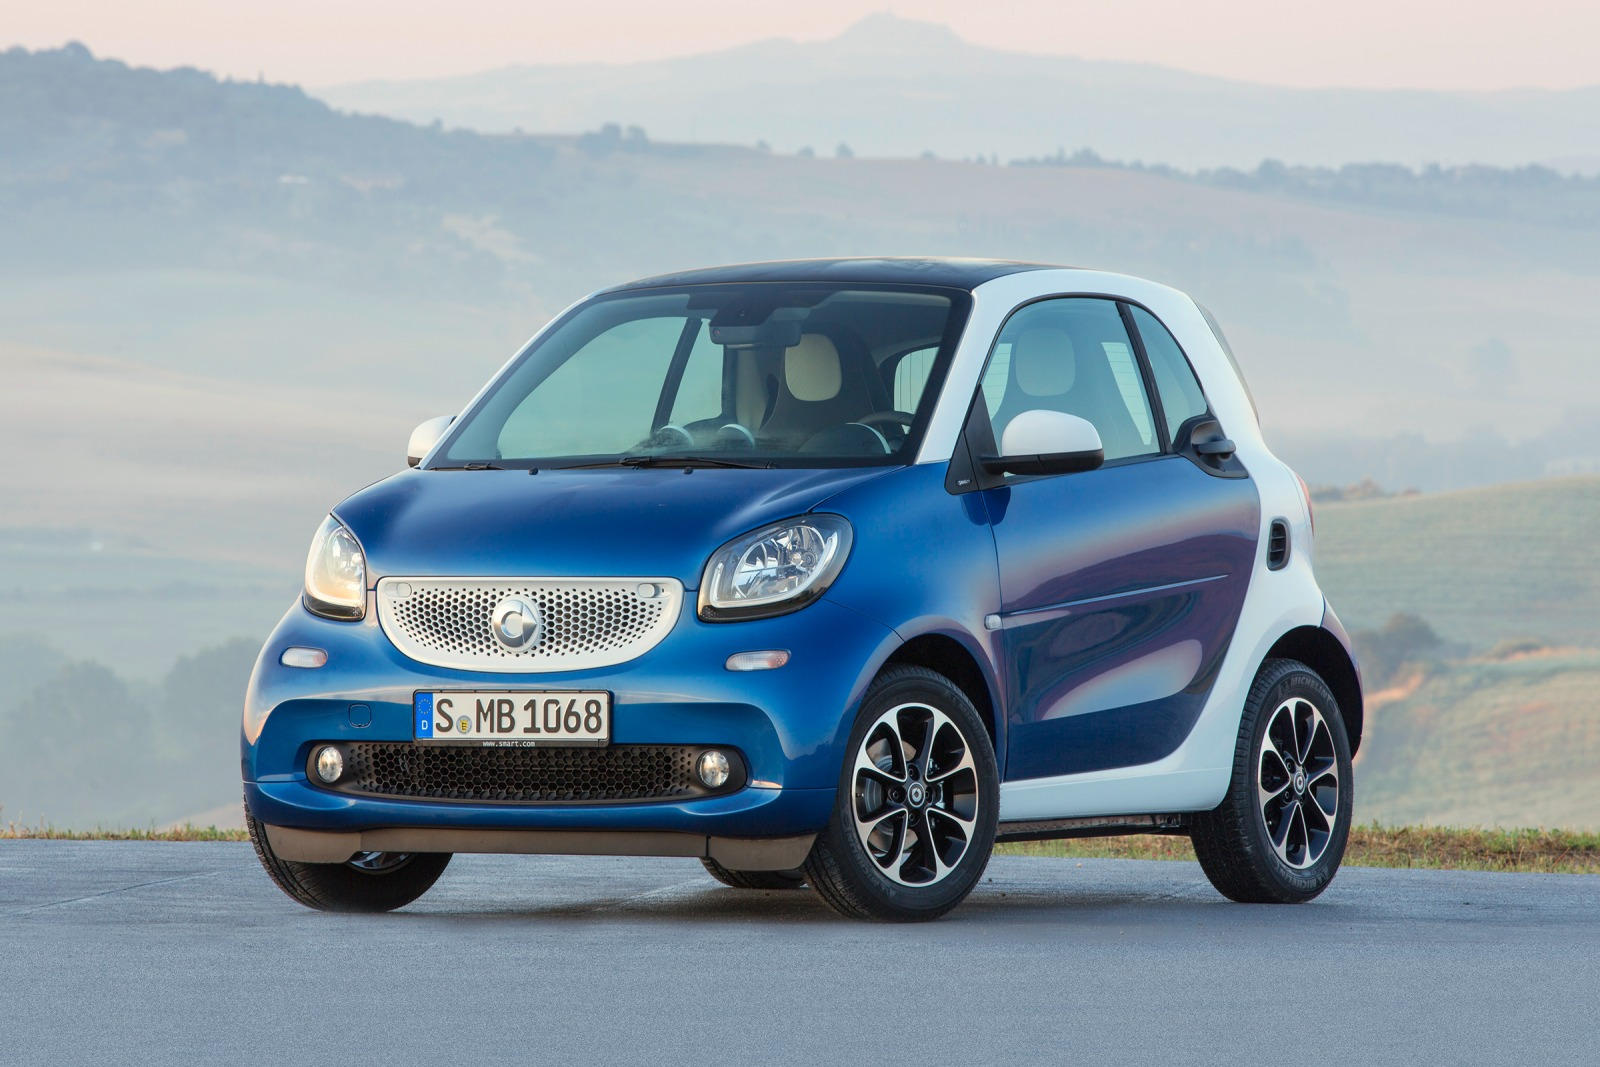 Smart Fortwo review - prices, specs and 0-60 time